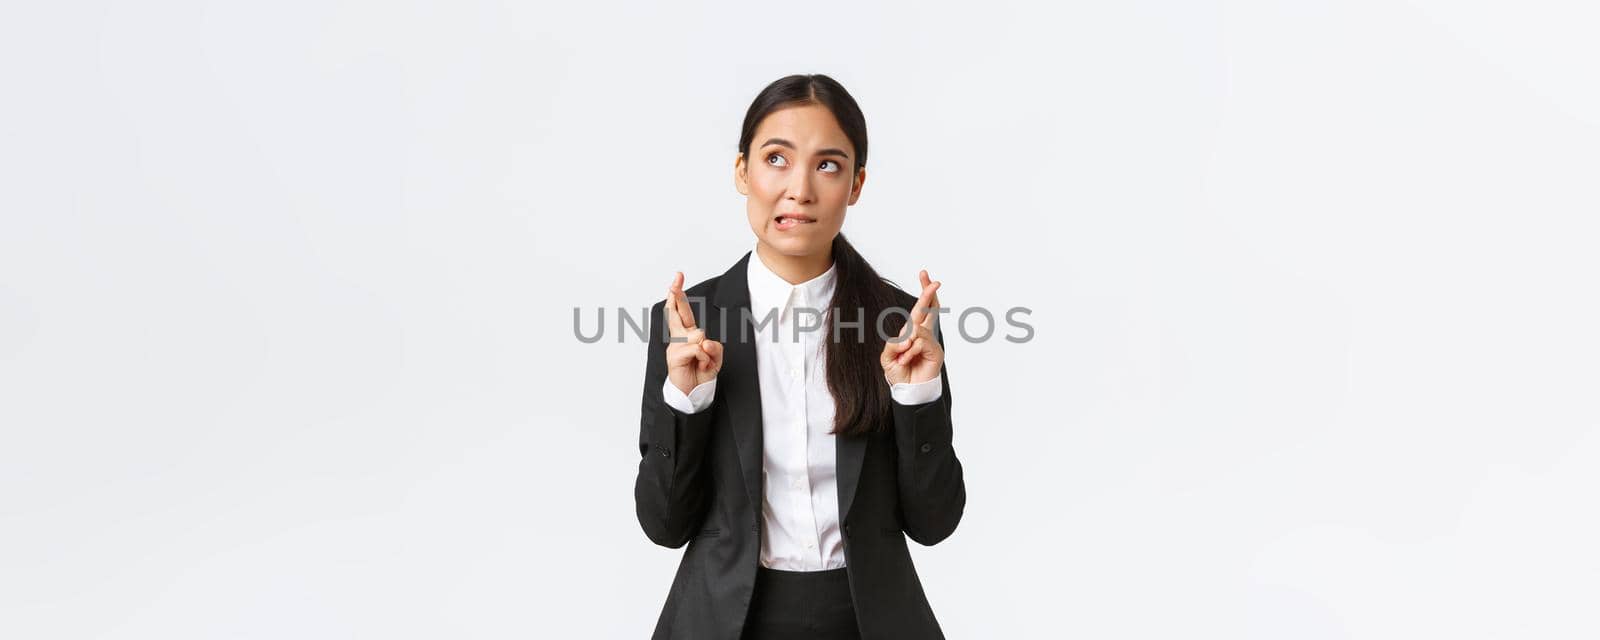 Hopeful asian businesswoman looking worried, biting lip and cross fingers good luck, making wish, anticipating big contract or deal, worried about outcome, standing white background.